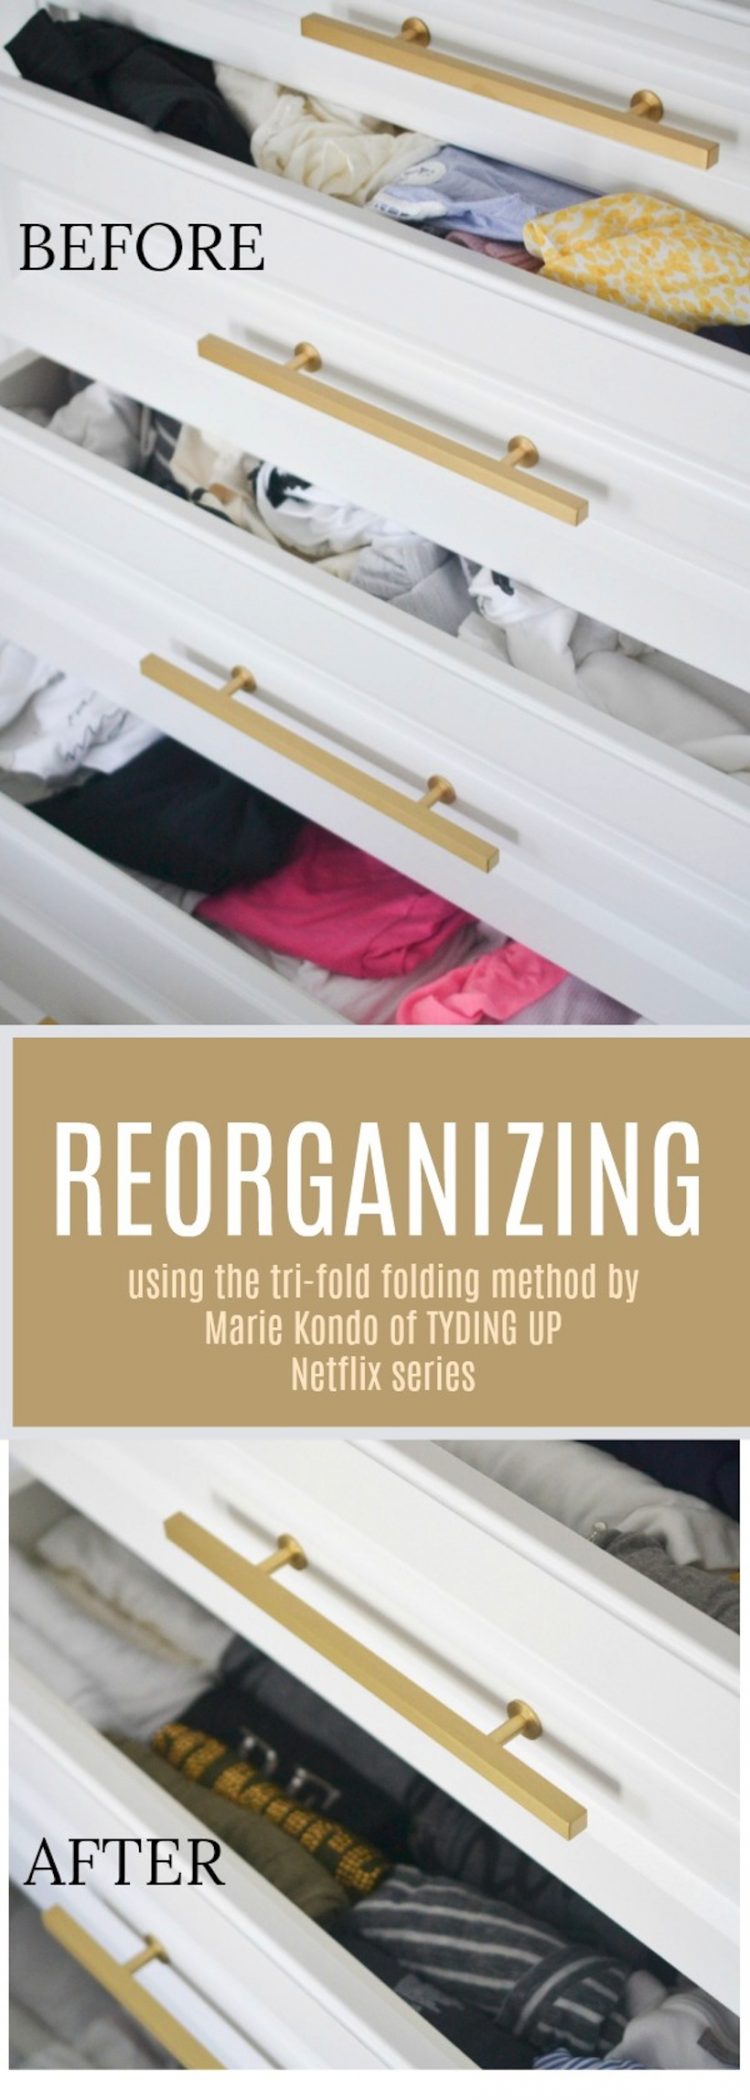 GETTING REORGANIZED: INSPIRED BY NETFLIX TIDYING UP WITH MARIE KONDO